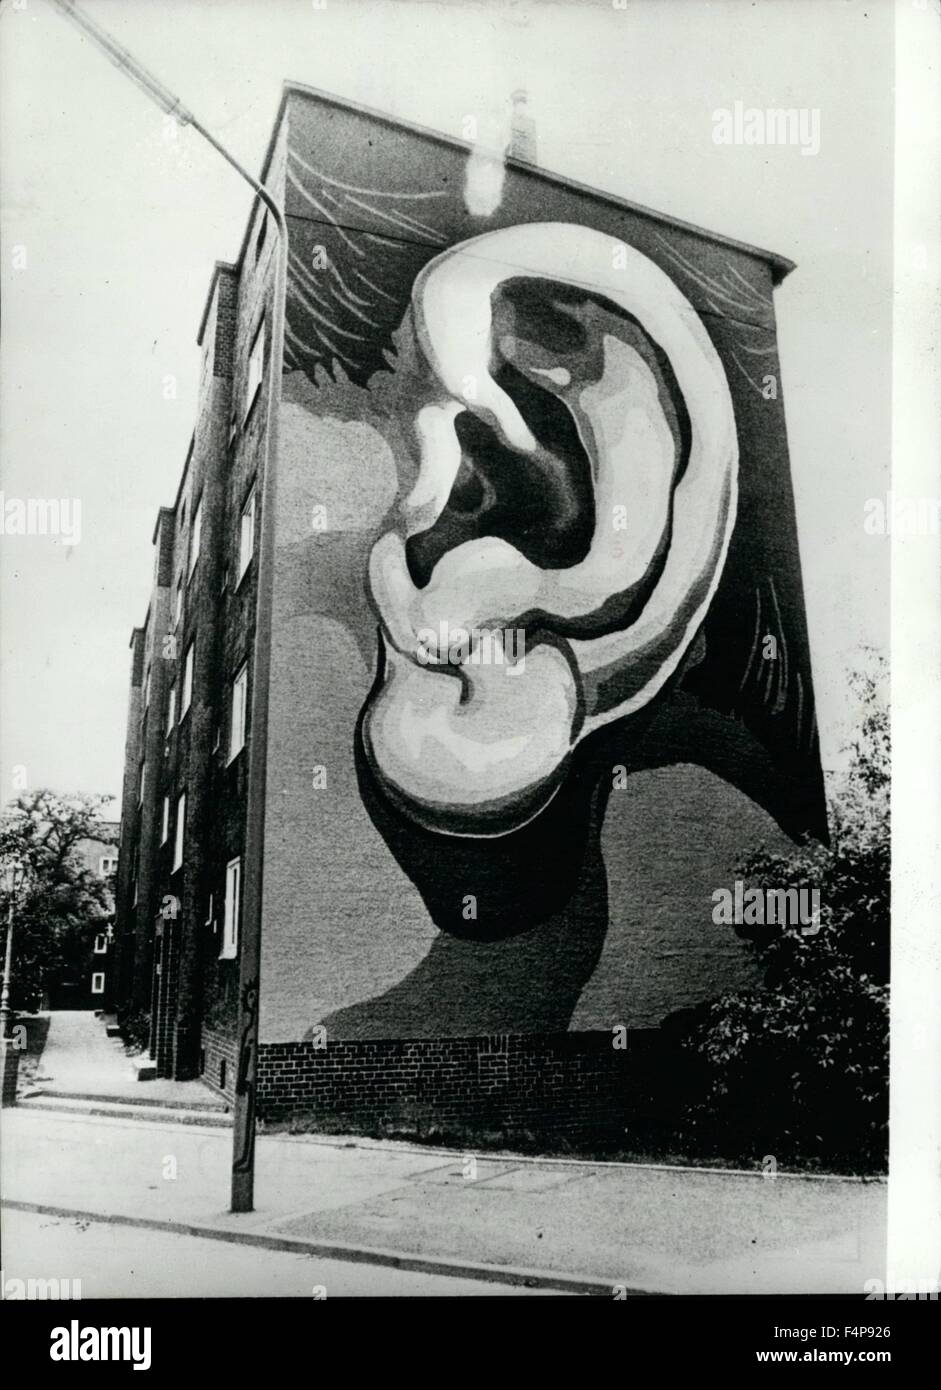 1965 - Walls have ears Ã¢â‚¬' And just to prove the old saying this wall on a house in Duesseldorf West Germany has a giant ear painted by some students of arts. © Keystone Pictures USA/ZUMAPRESS.com/Alamy Live News Stock Photo